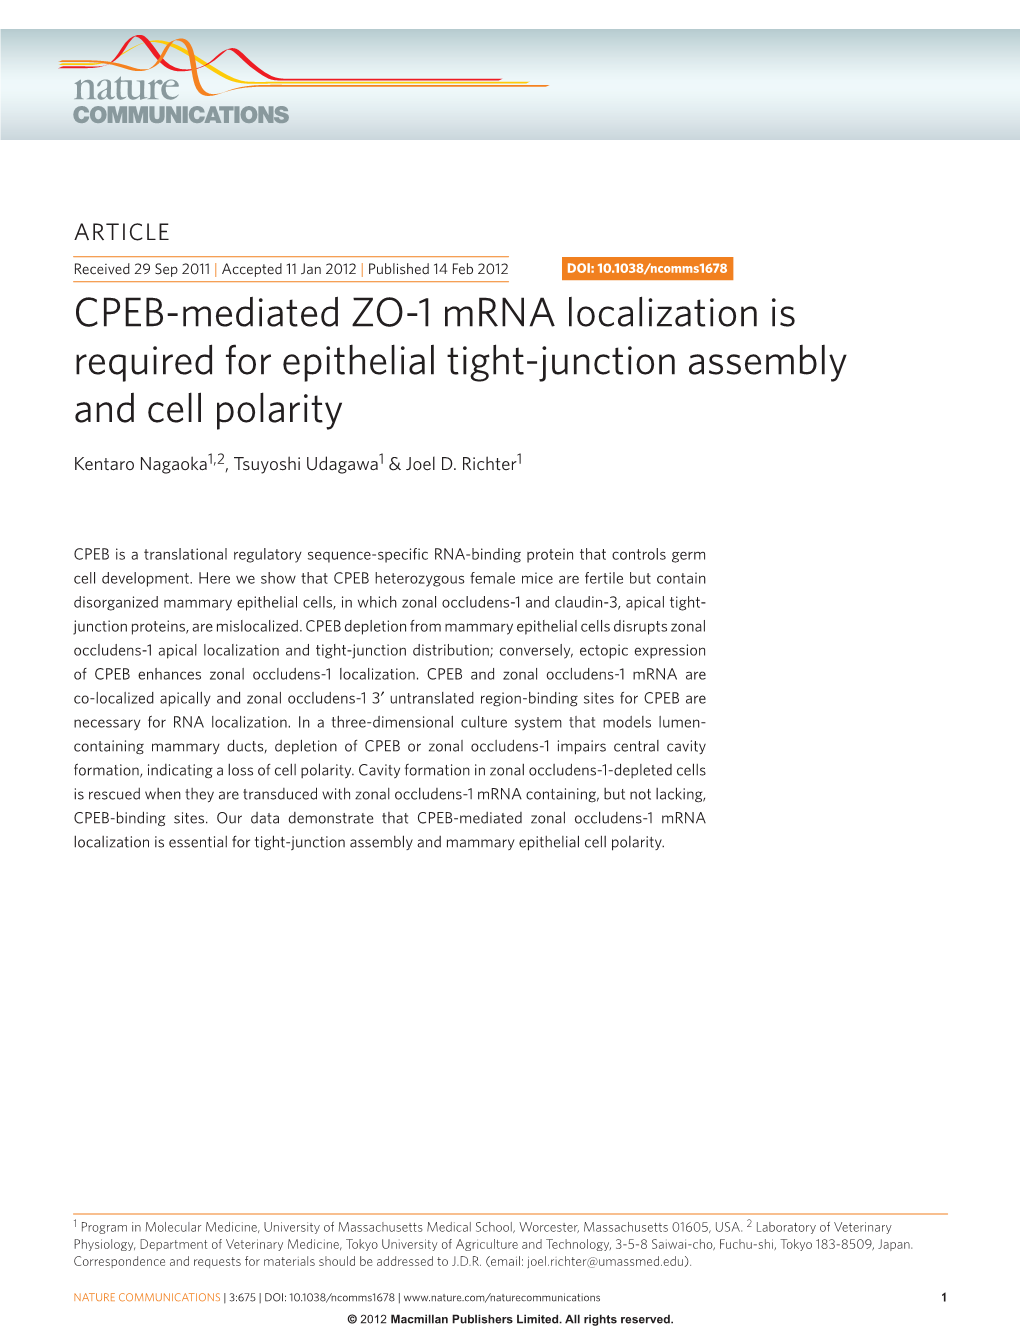 CPEB-Mediated ZO-1 Mrna Localization Is Required for Epithelial Tight-Junction Assembly and Cell Polarity